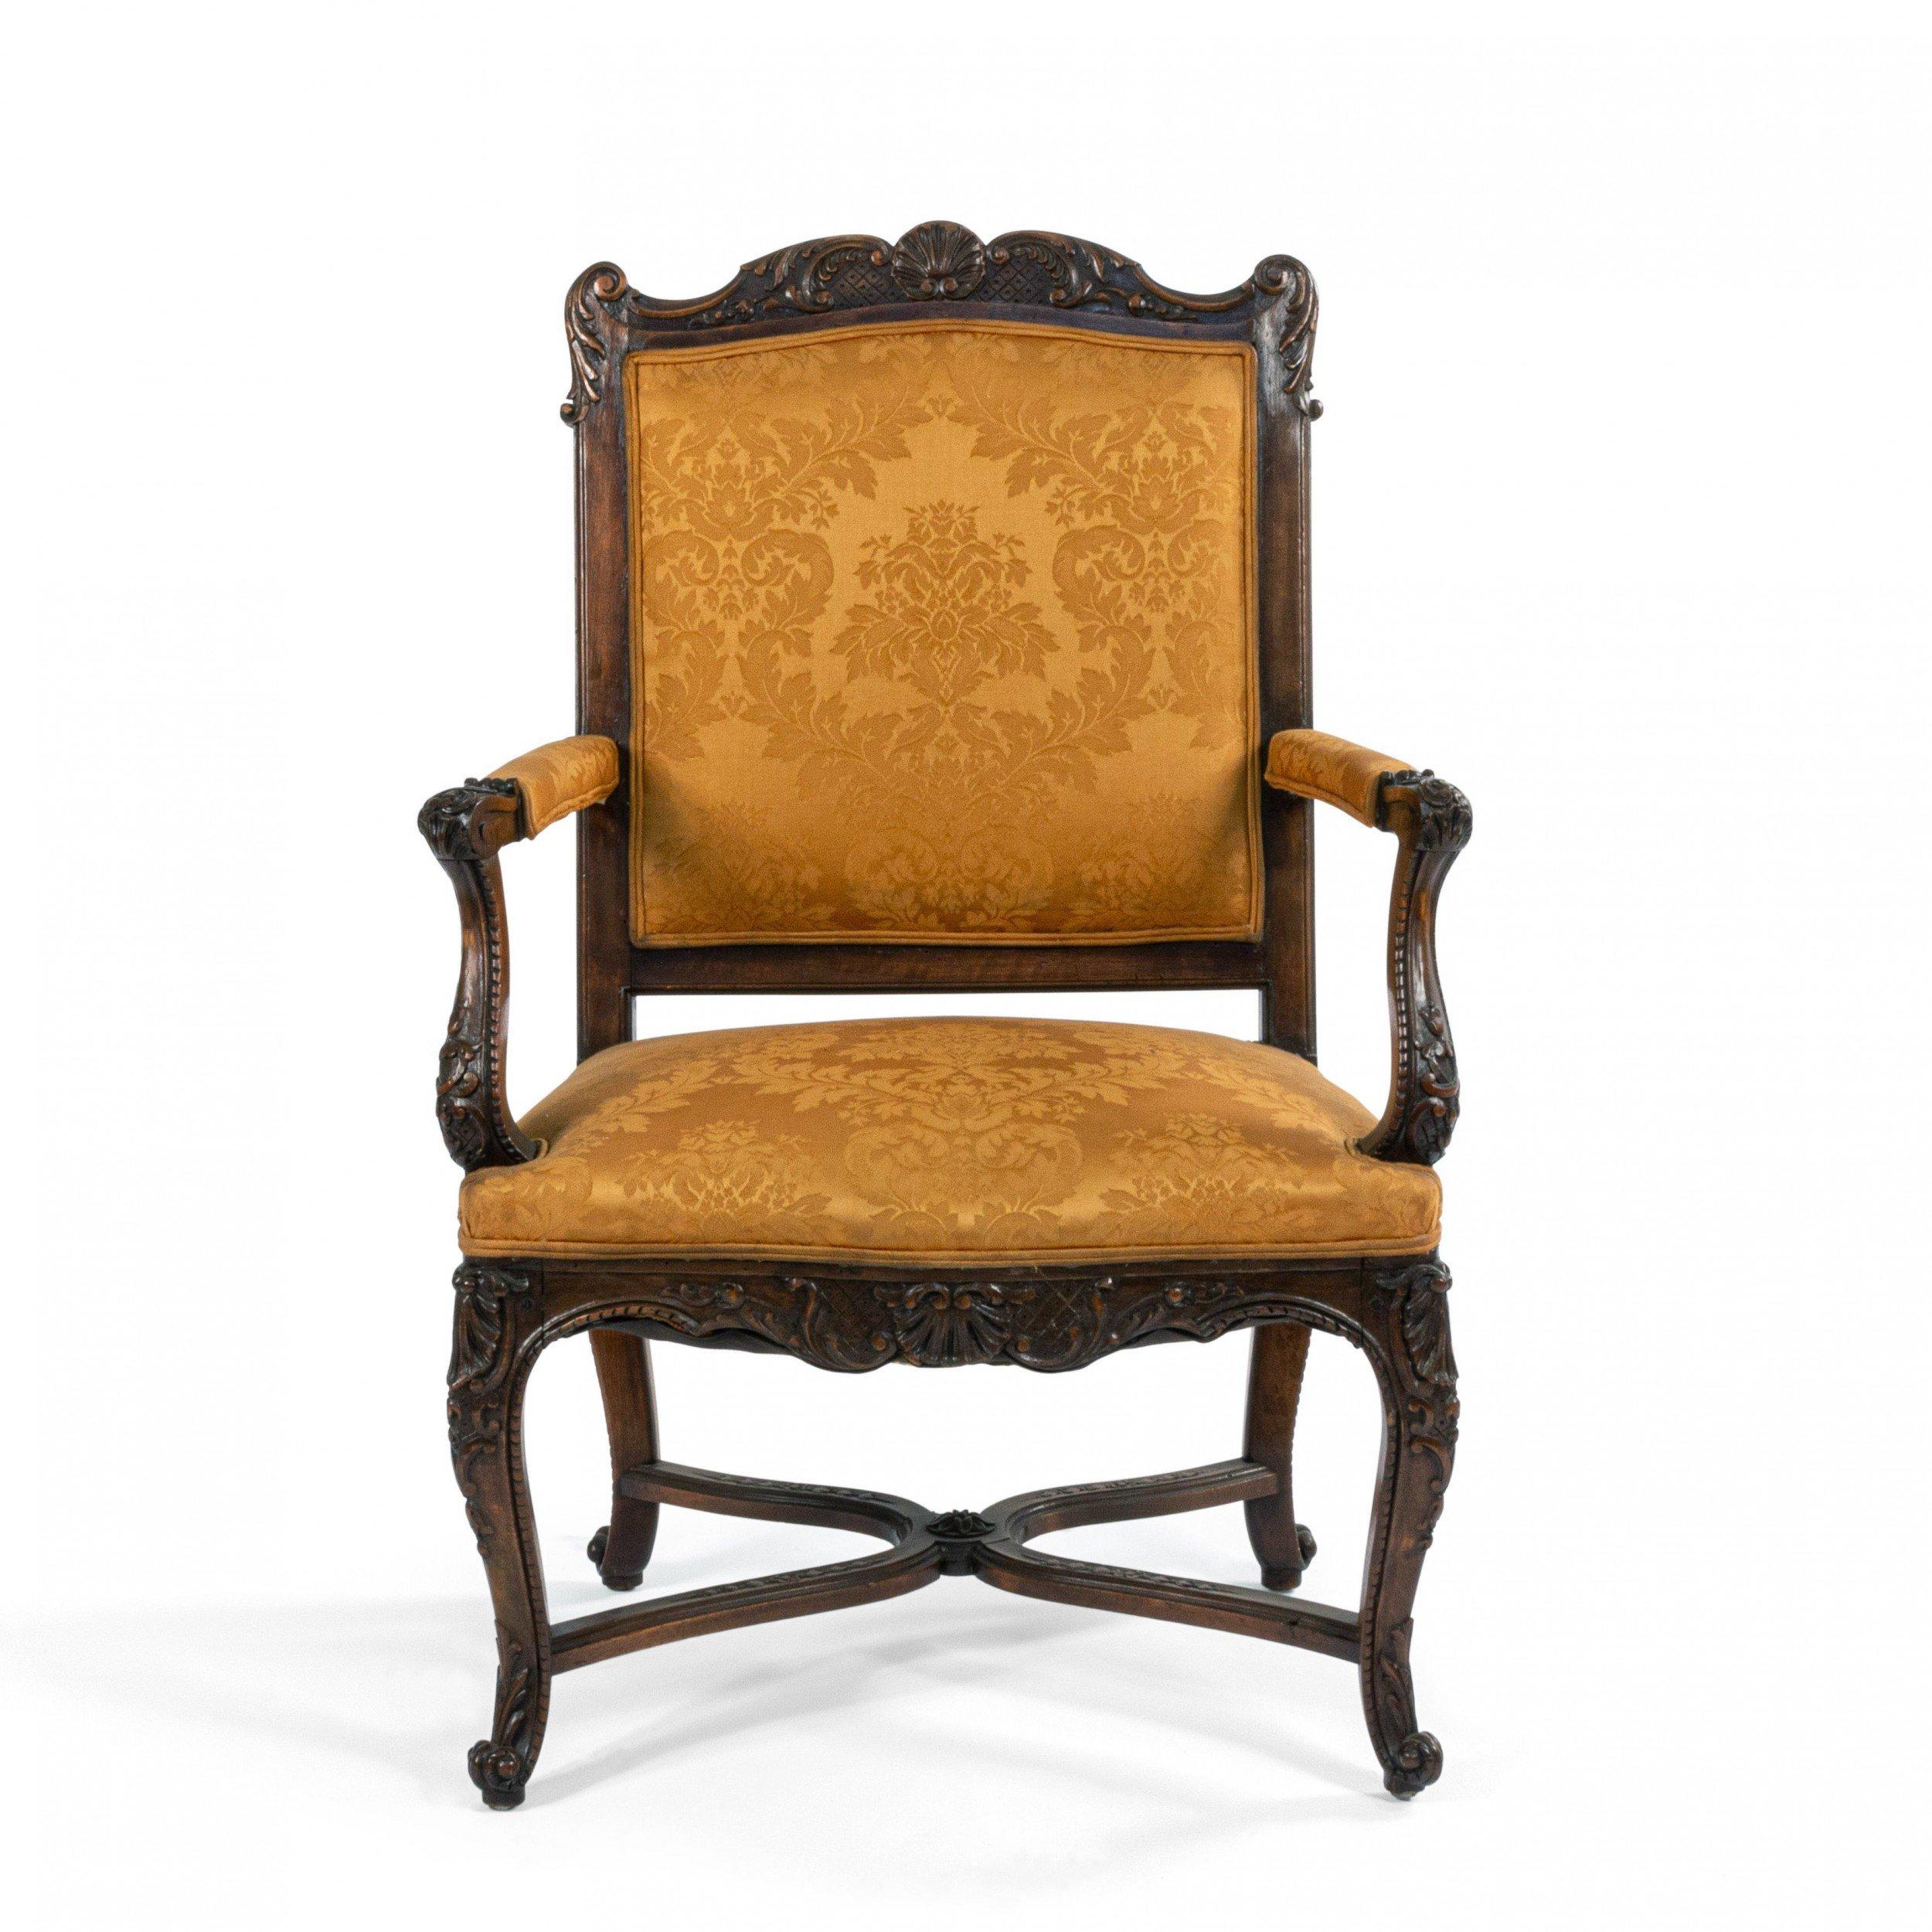 Pair of French Regence style (19th Cent) walnut Armchairs with gold upholstery.
 